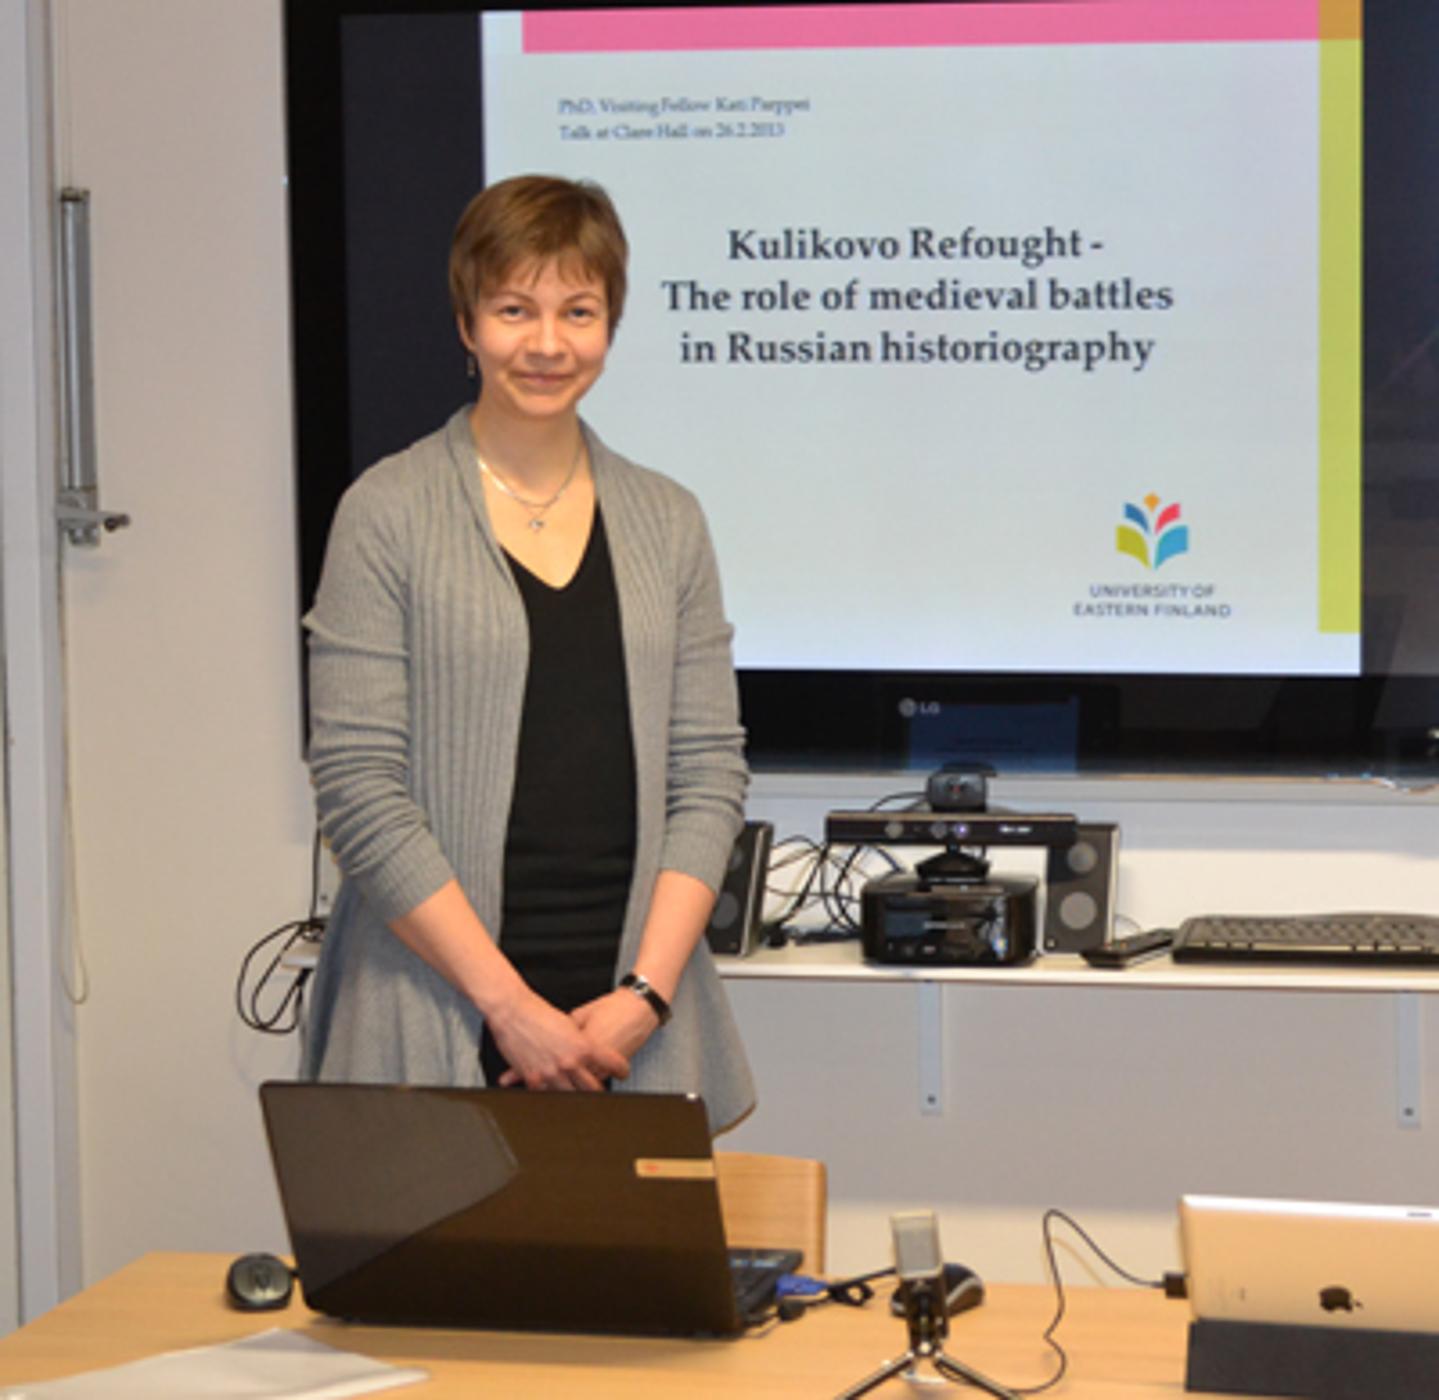 Kati Parppei - Kulikovo Refought – The role of medieval battles in Russian historiography